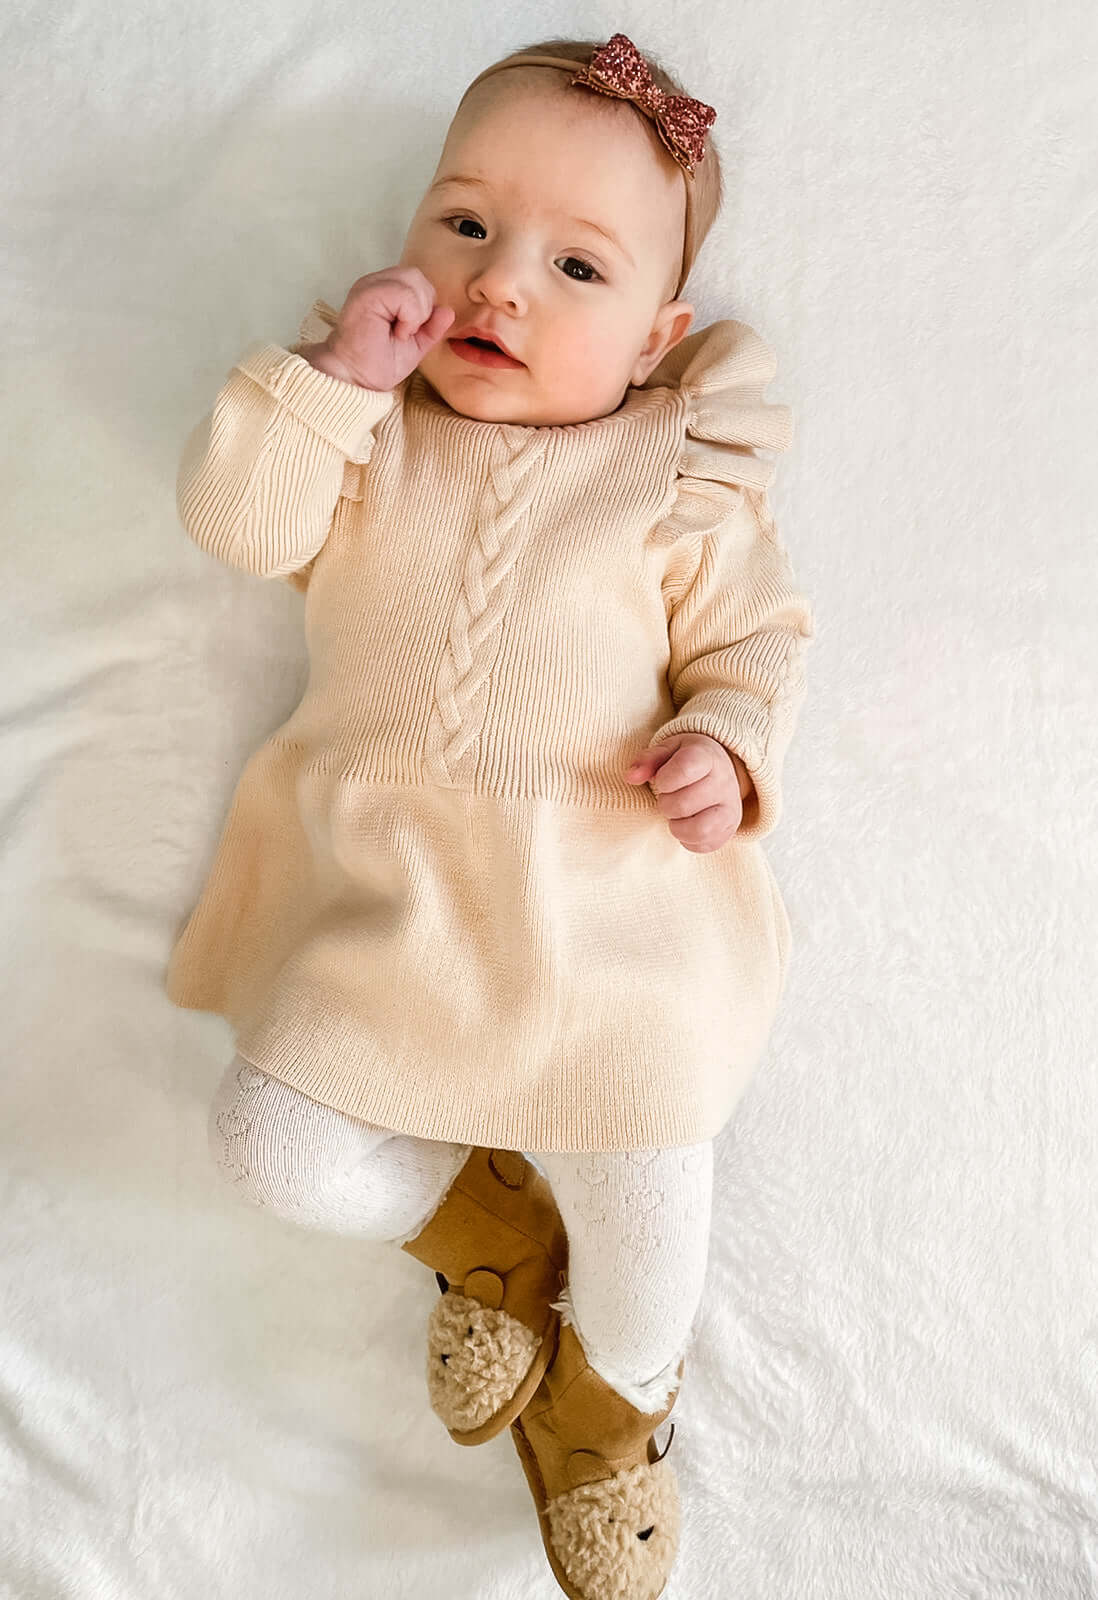 Beautiful Beige Flutter Sleeve Knitted Dress: Made from soft knit, beautiful frill detail on shoulders. Perfect for any occasion, this dress offers both style and comfort for your baby girl